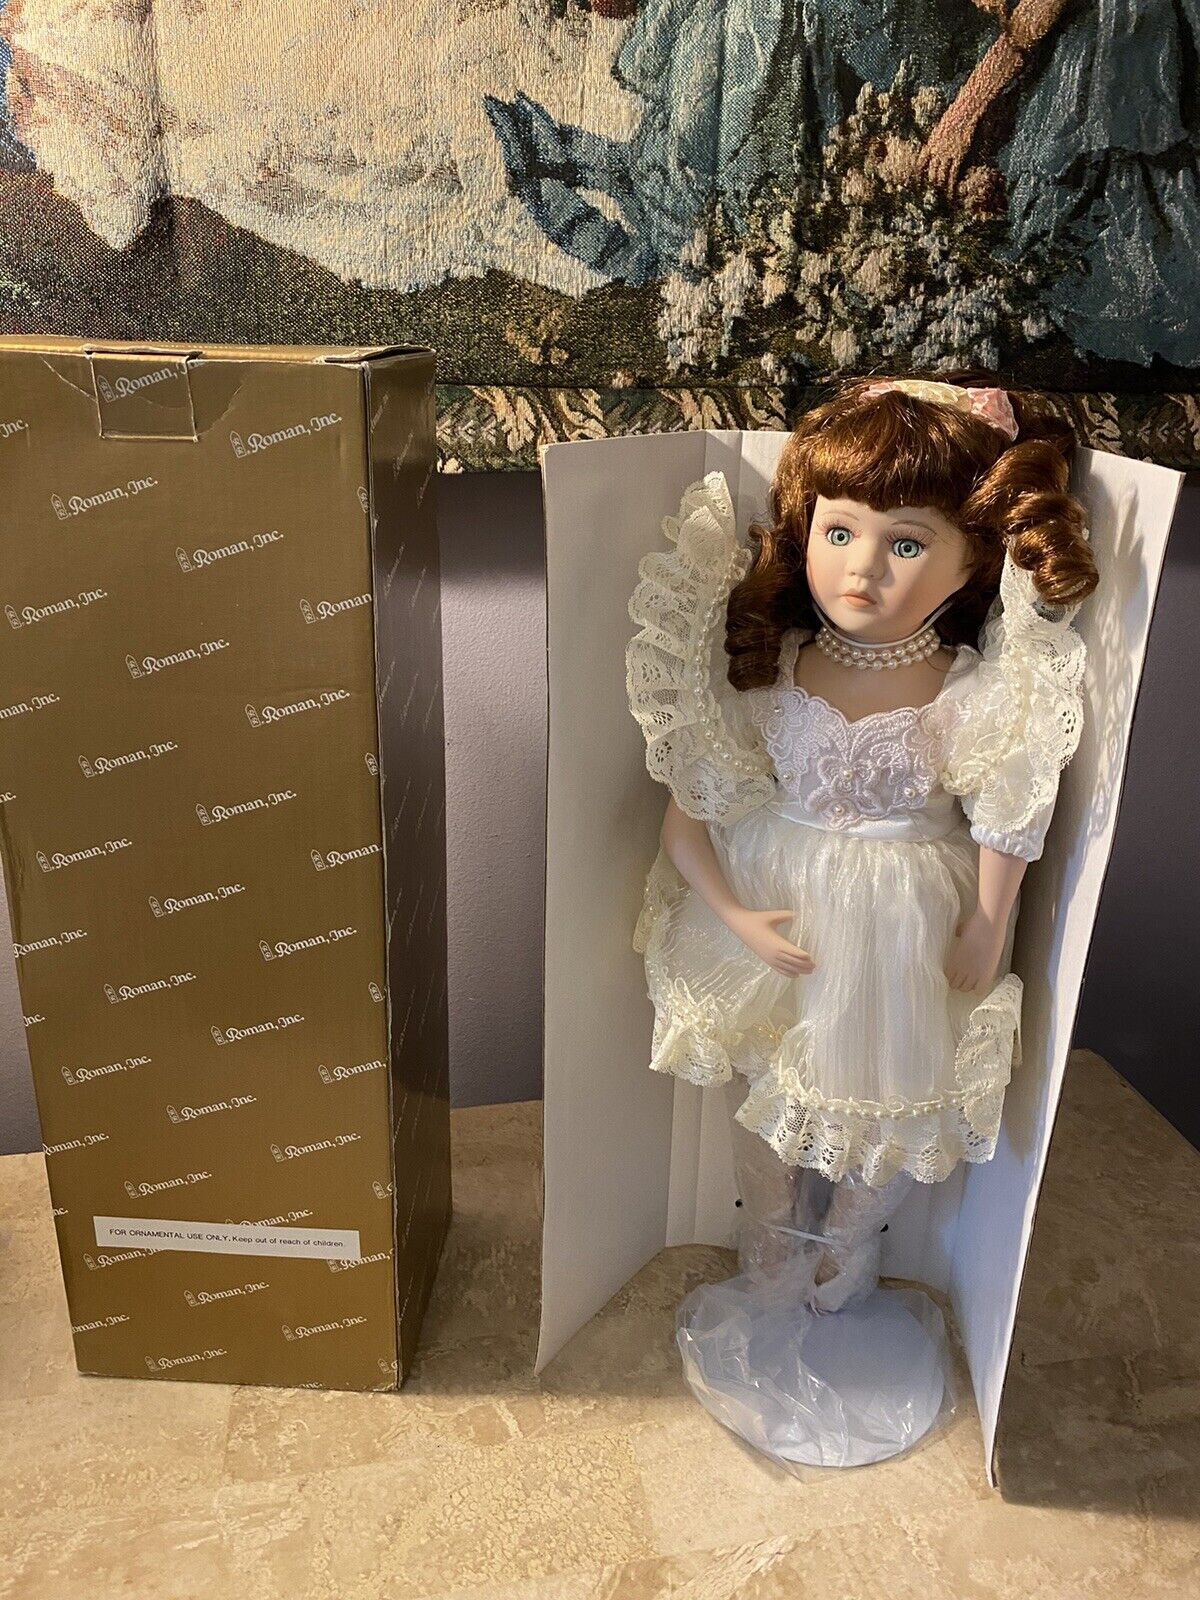 Beautiful Porcelain Dream Doll 16” Tall Gorgeous Face And Dress New In Box